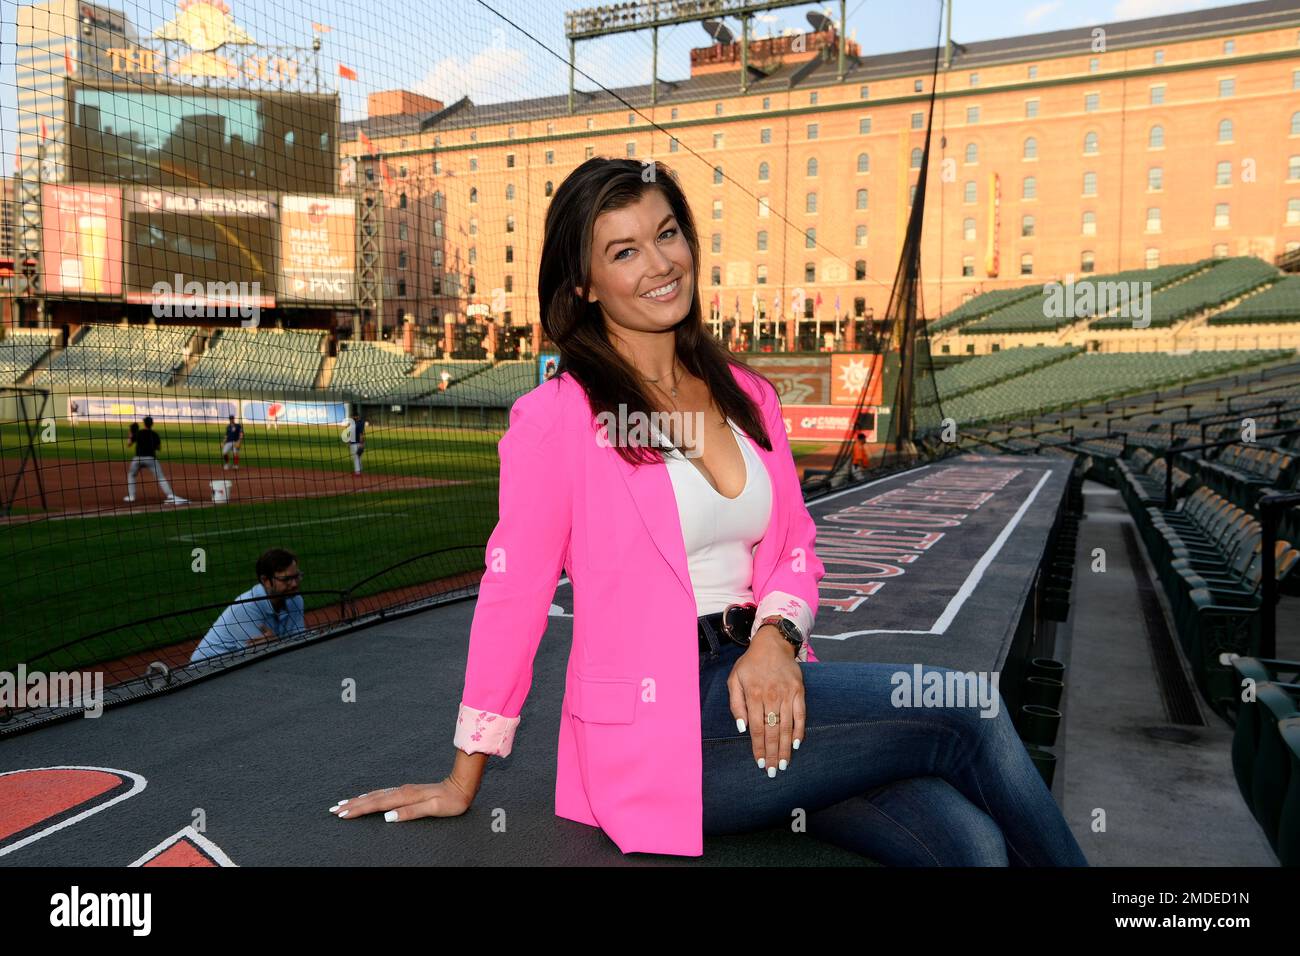 Baltimore Orioles radio and TV announcer Melanie Newman poses for a photograph before a baseball game at Oriole Park at Camden Yards, Tuesday, Sept